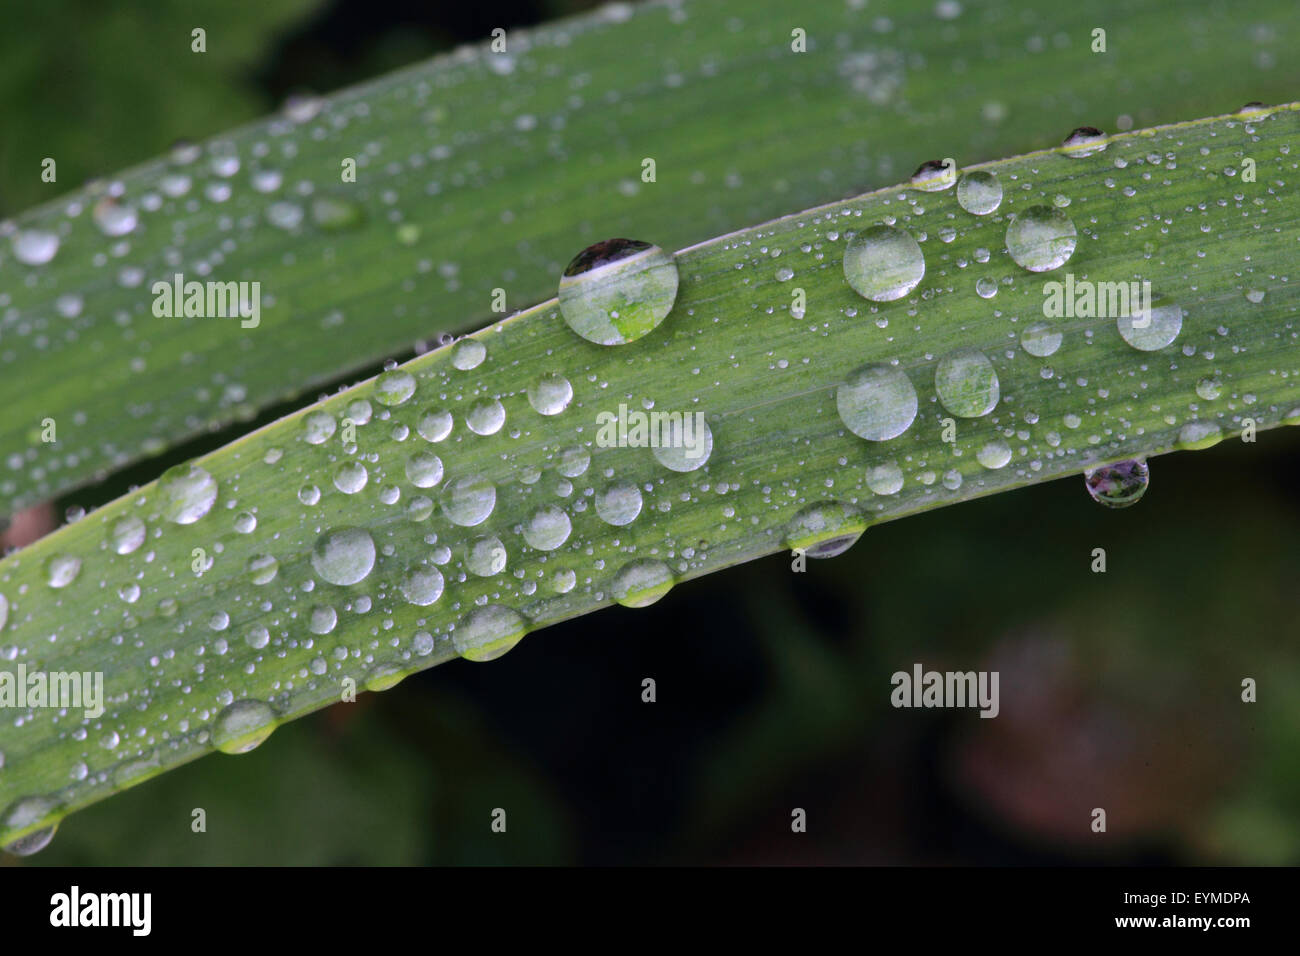 Drops of water on leaves Stock Photo